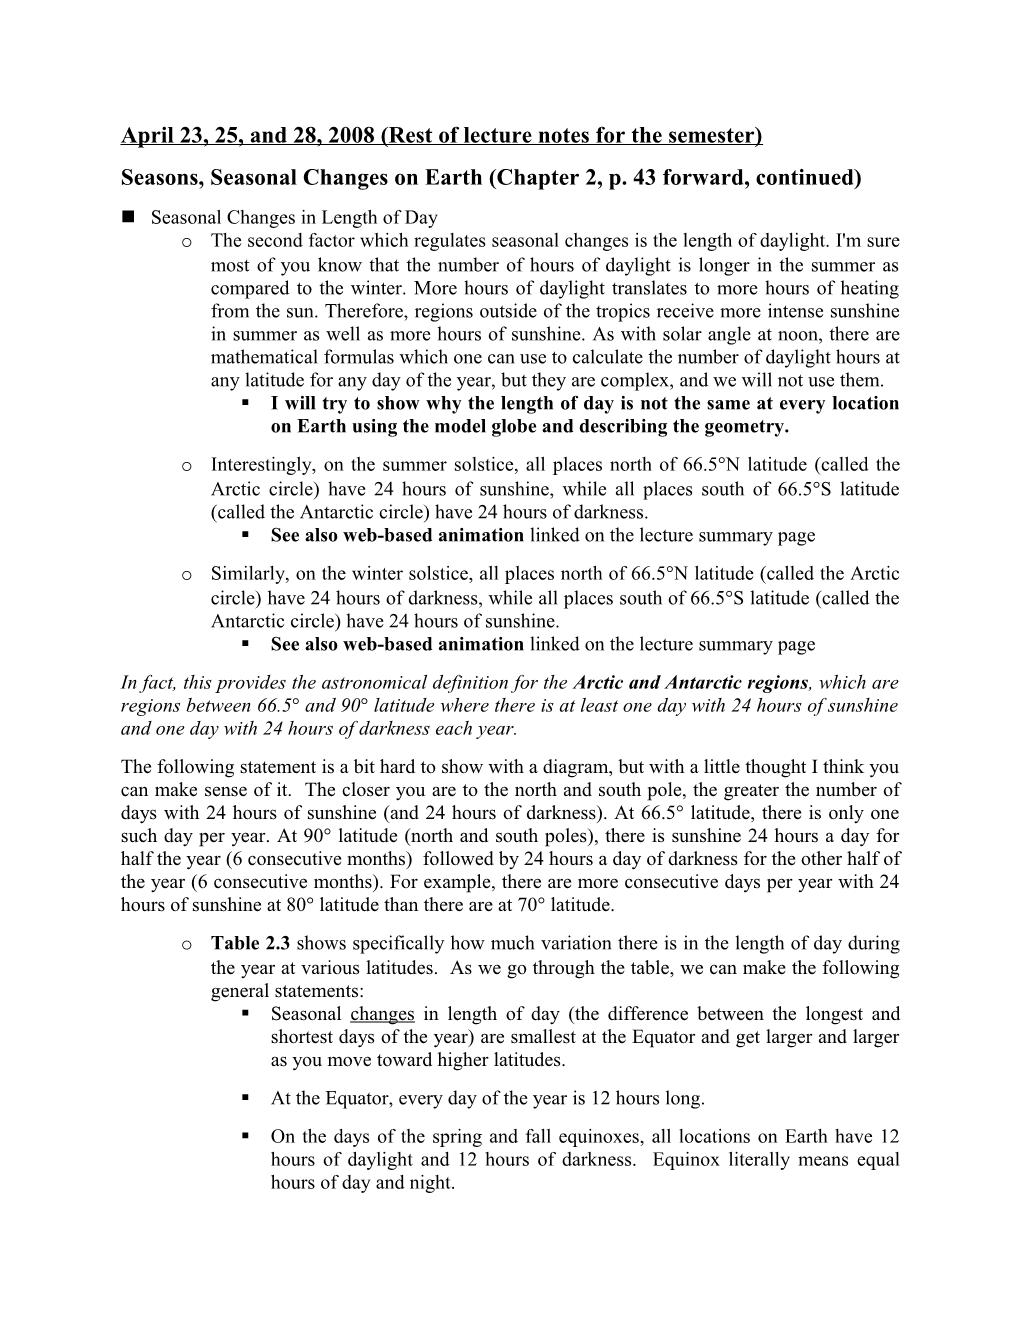 Seasons, Seasonal Changes on Earth (Chapter 2, P. 43 Forward, Continued)